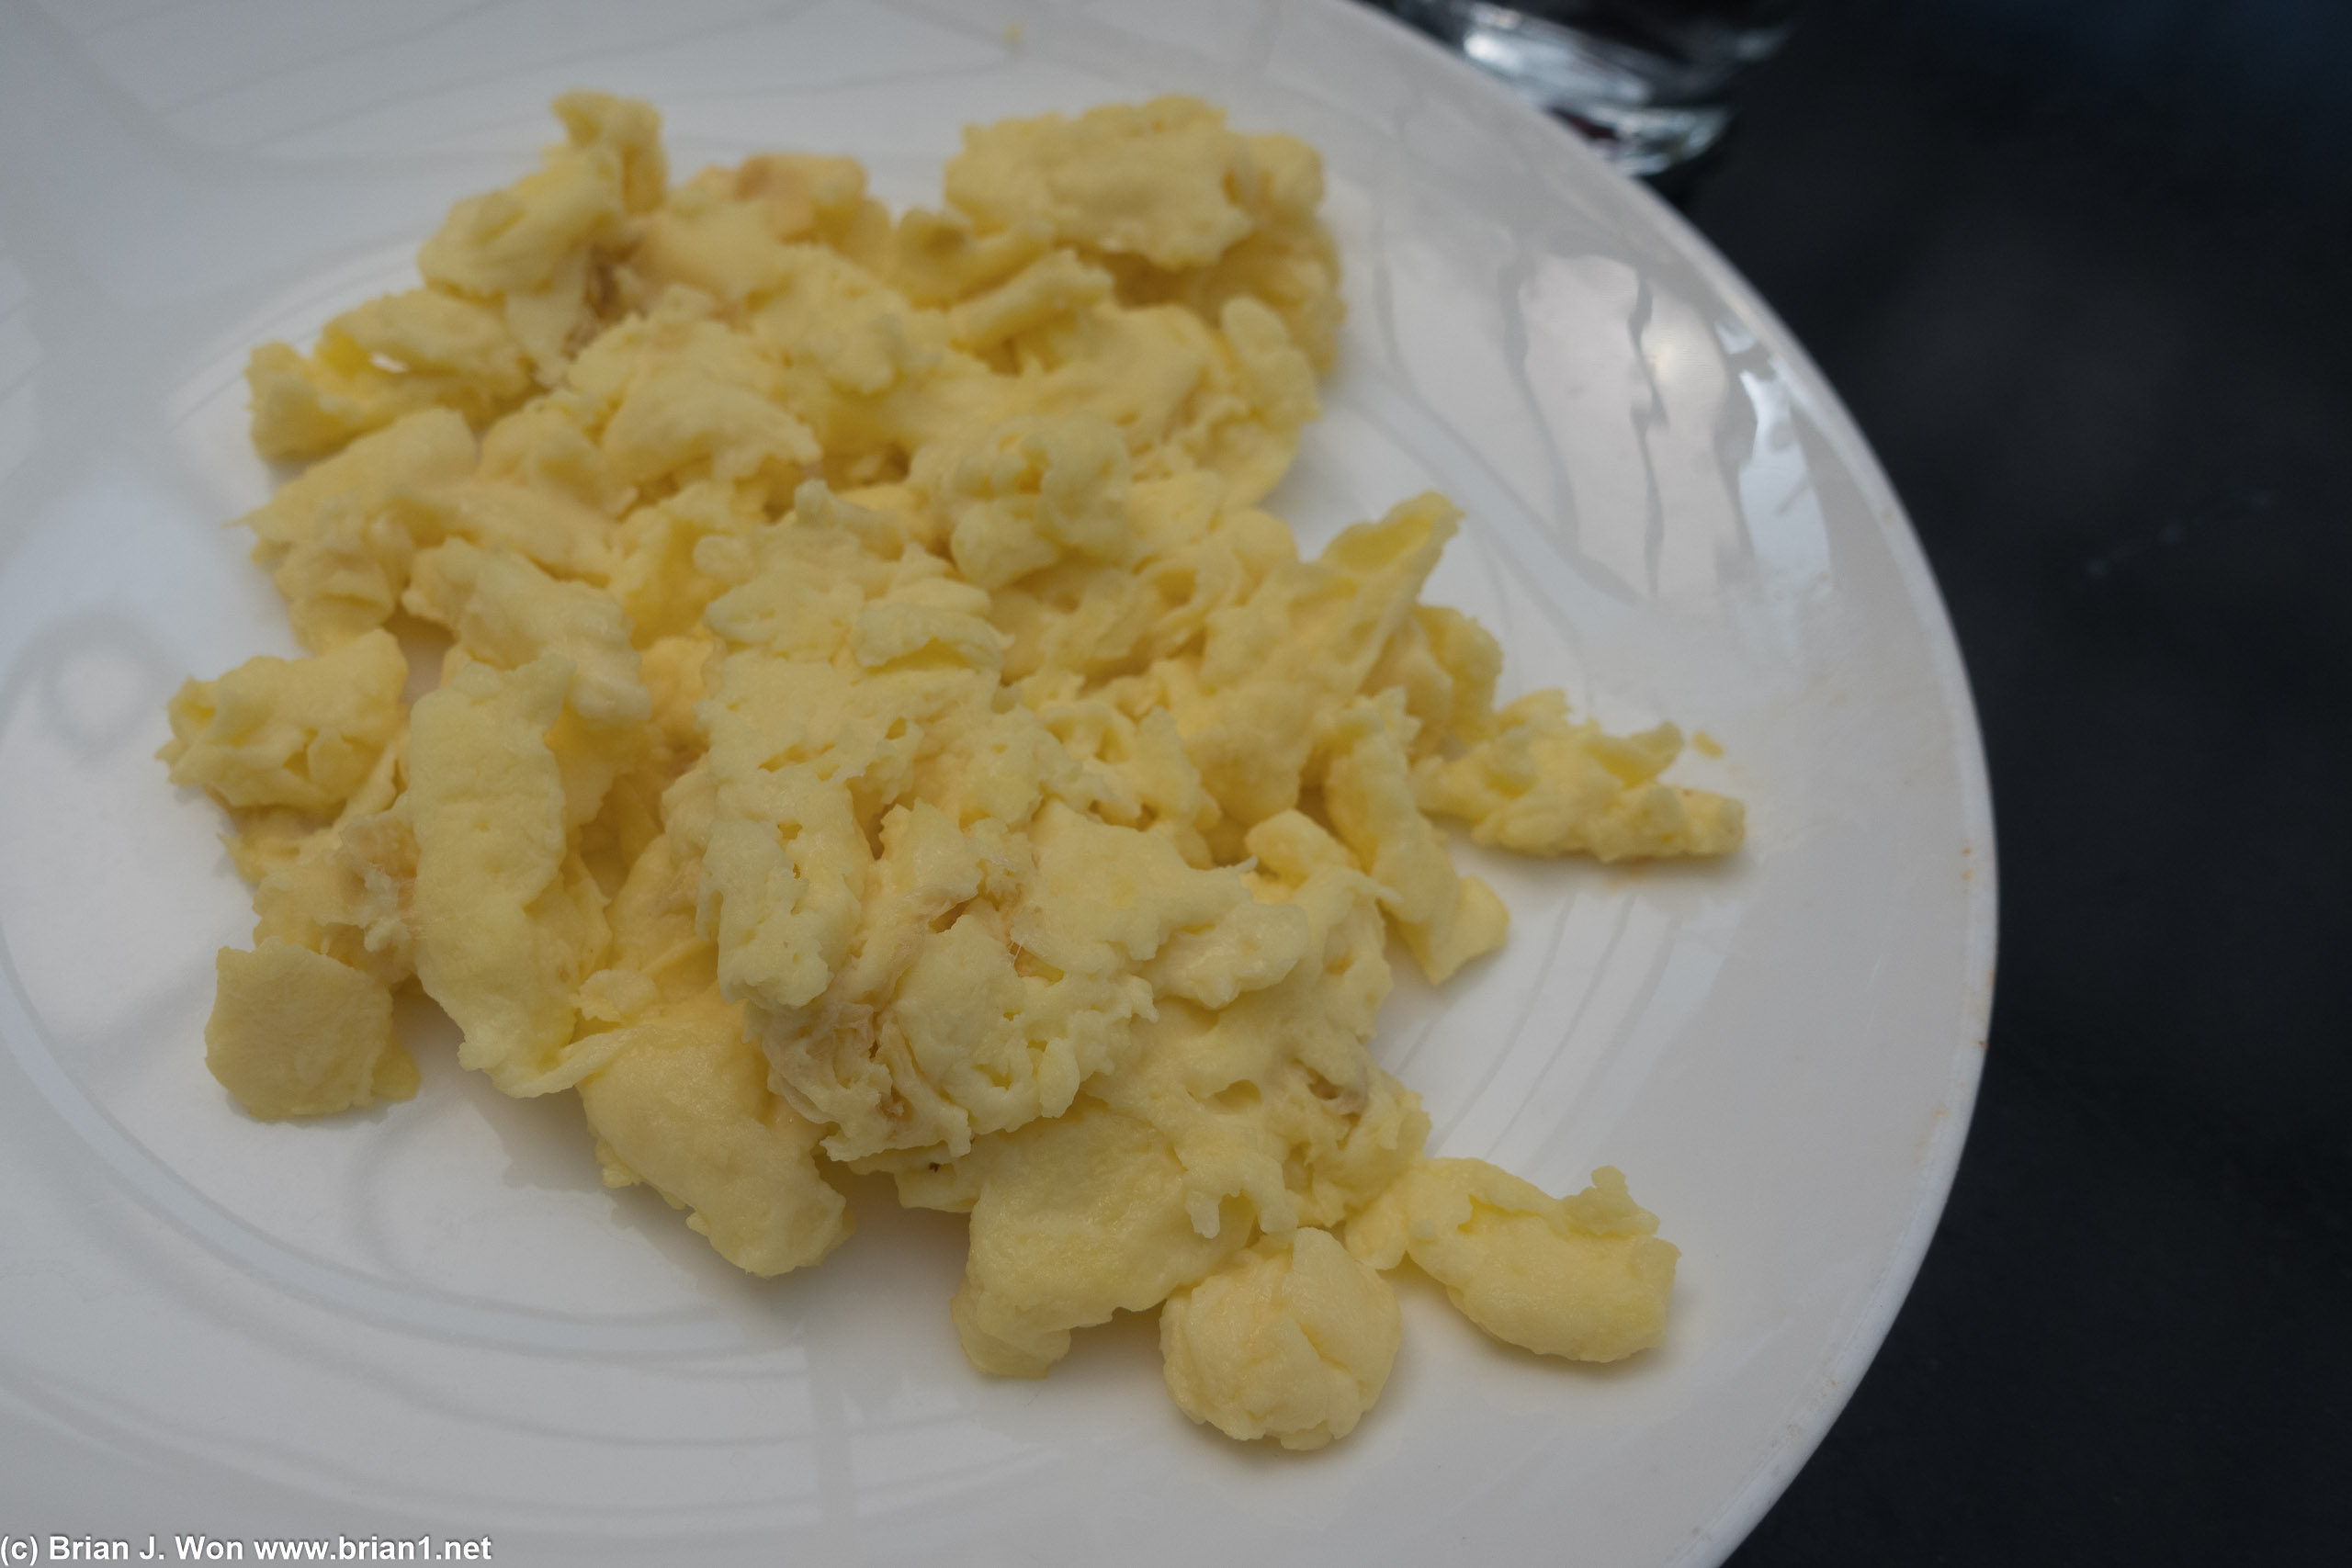 Scrambled eggs. Not sure these three items were worth $54 total ($29 after F&B credit).